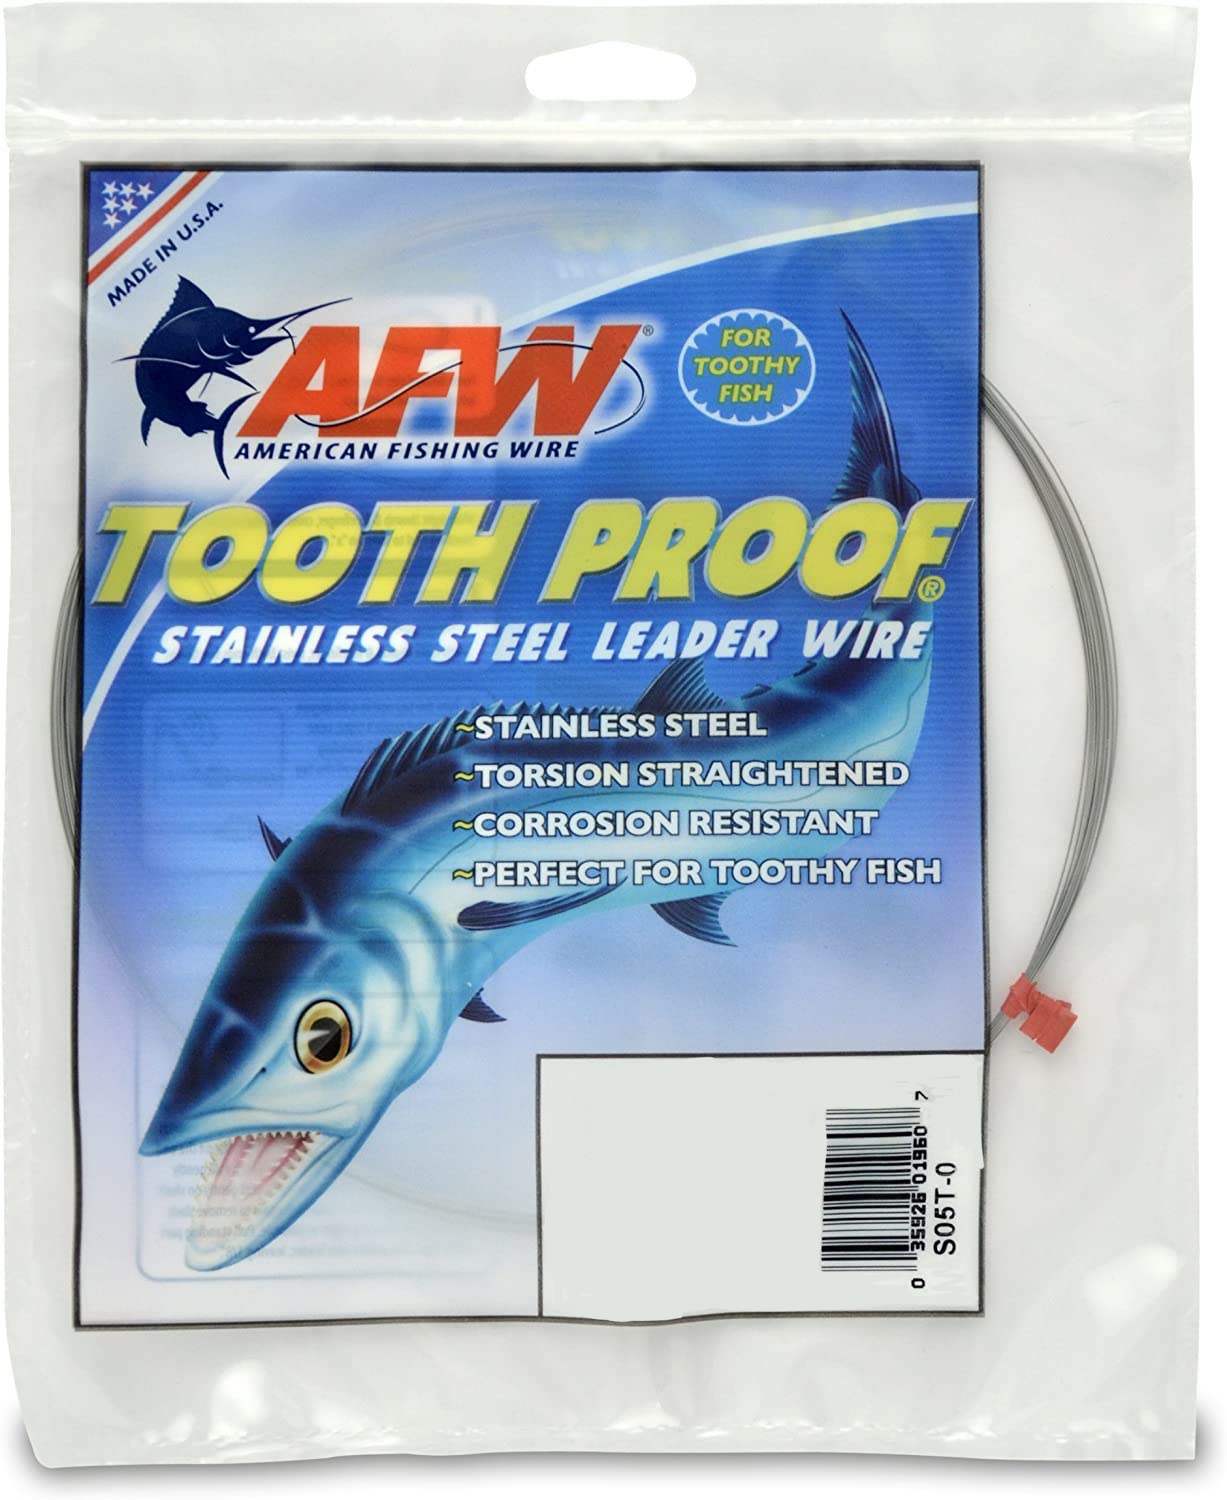 American Fishing Wire Bright Tooth Proof Stainless Steel Single Strand Leader Wire